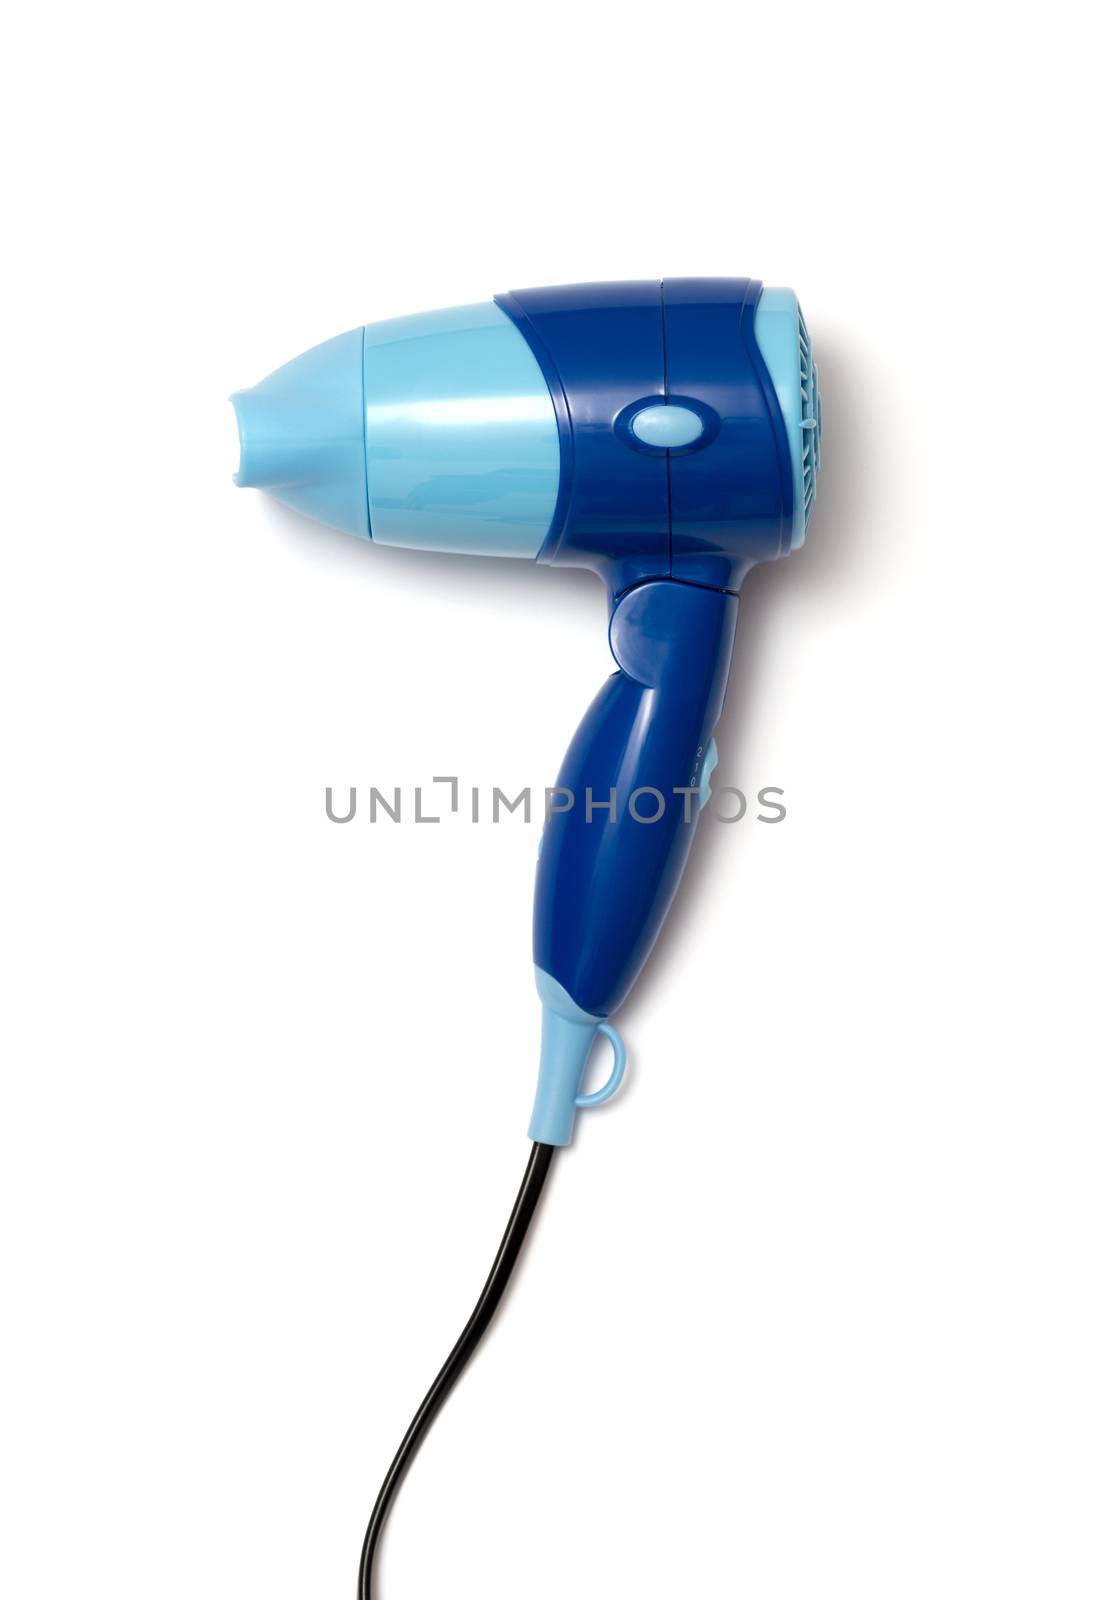 a travel hairdryer isolated on a white background